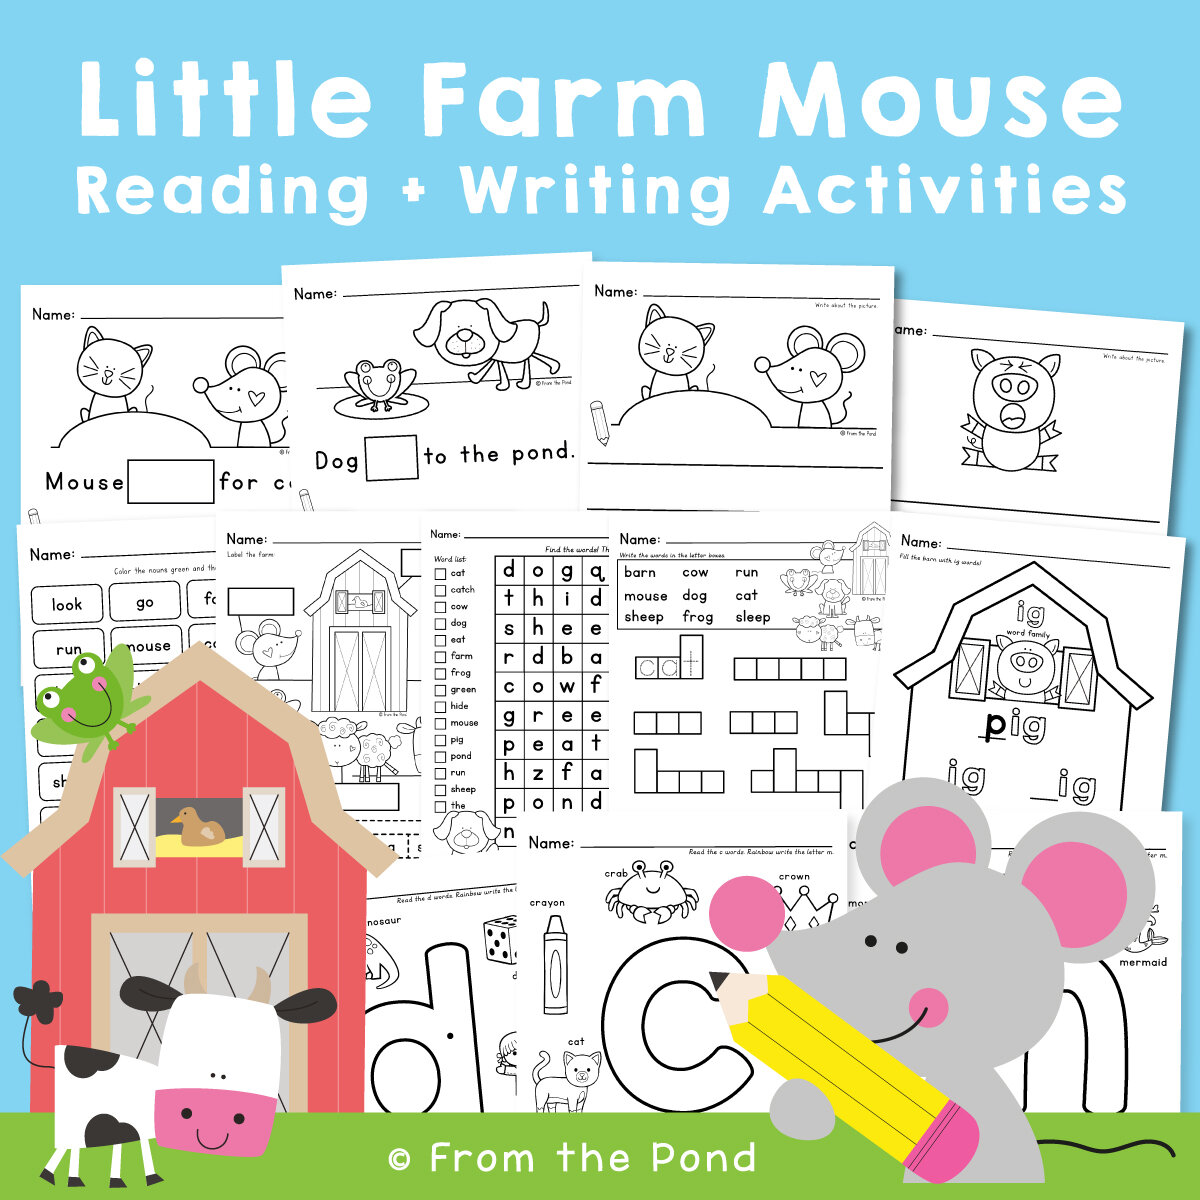 Reading and Writing Activities